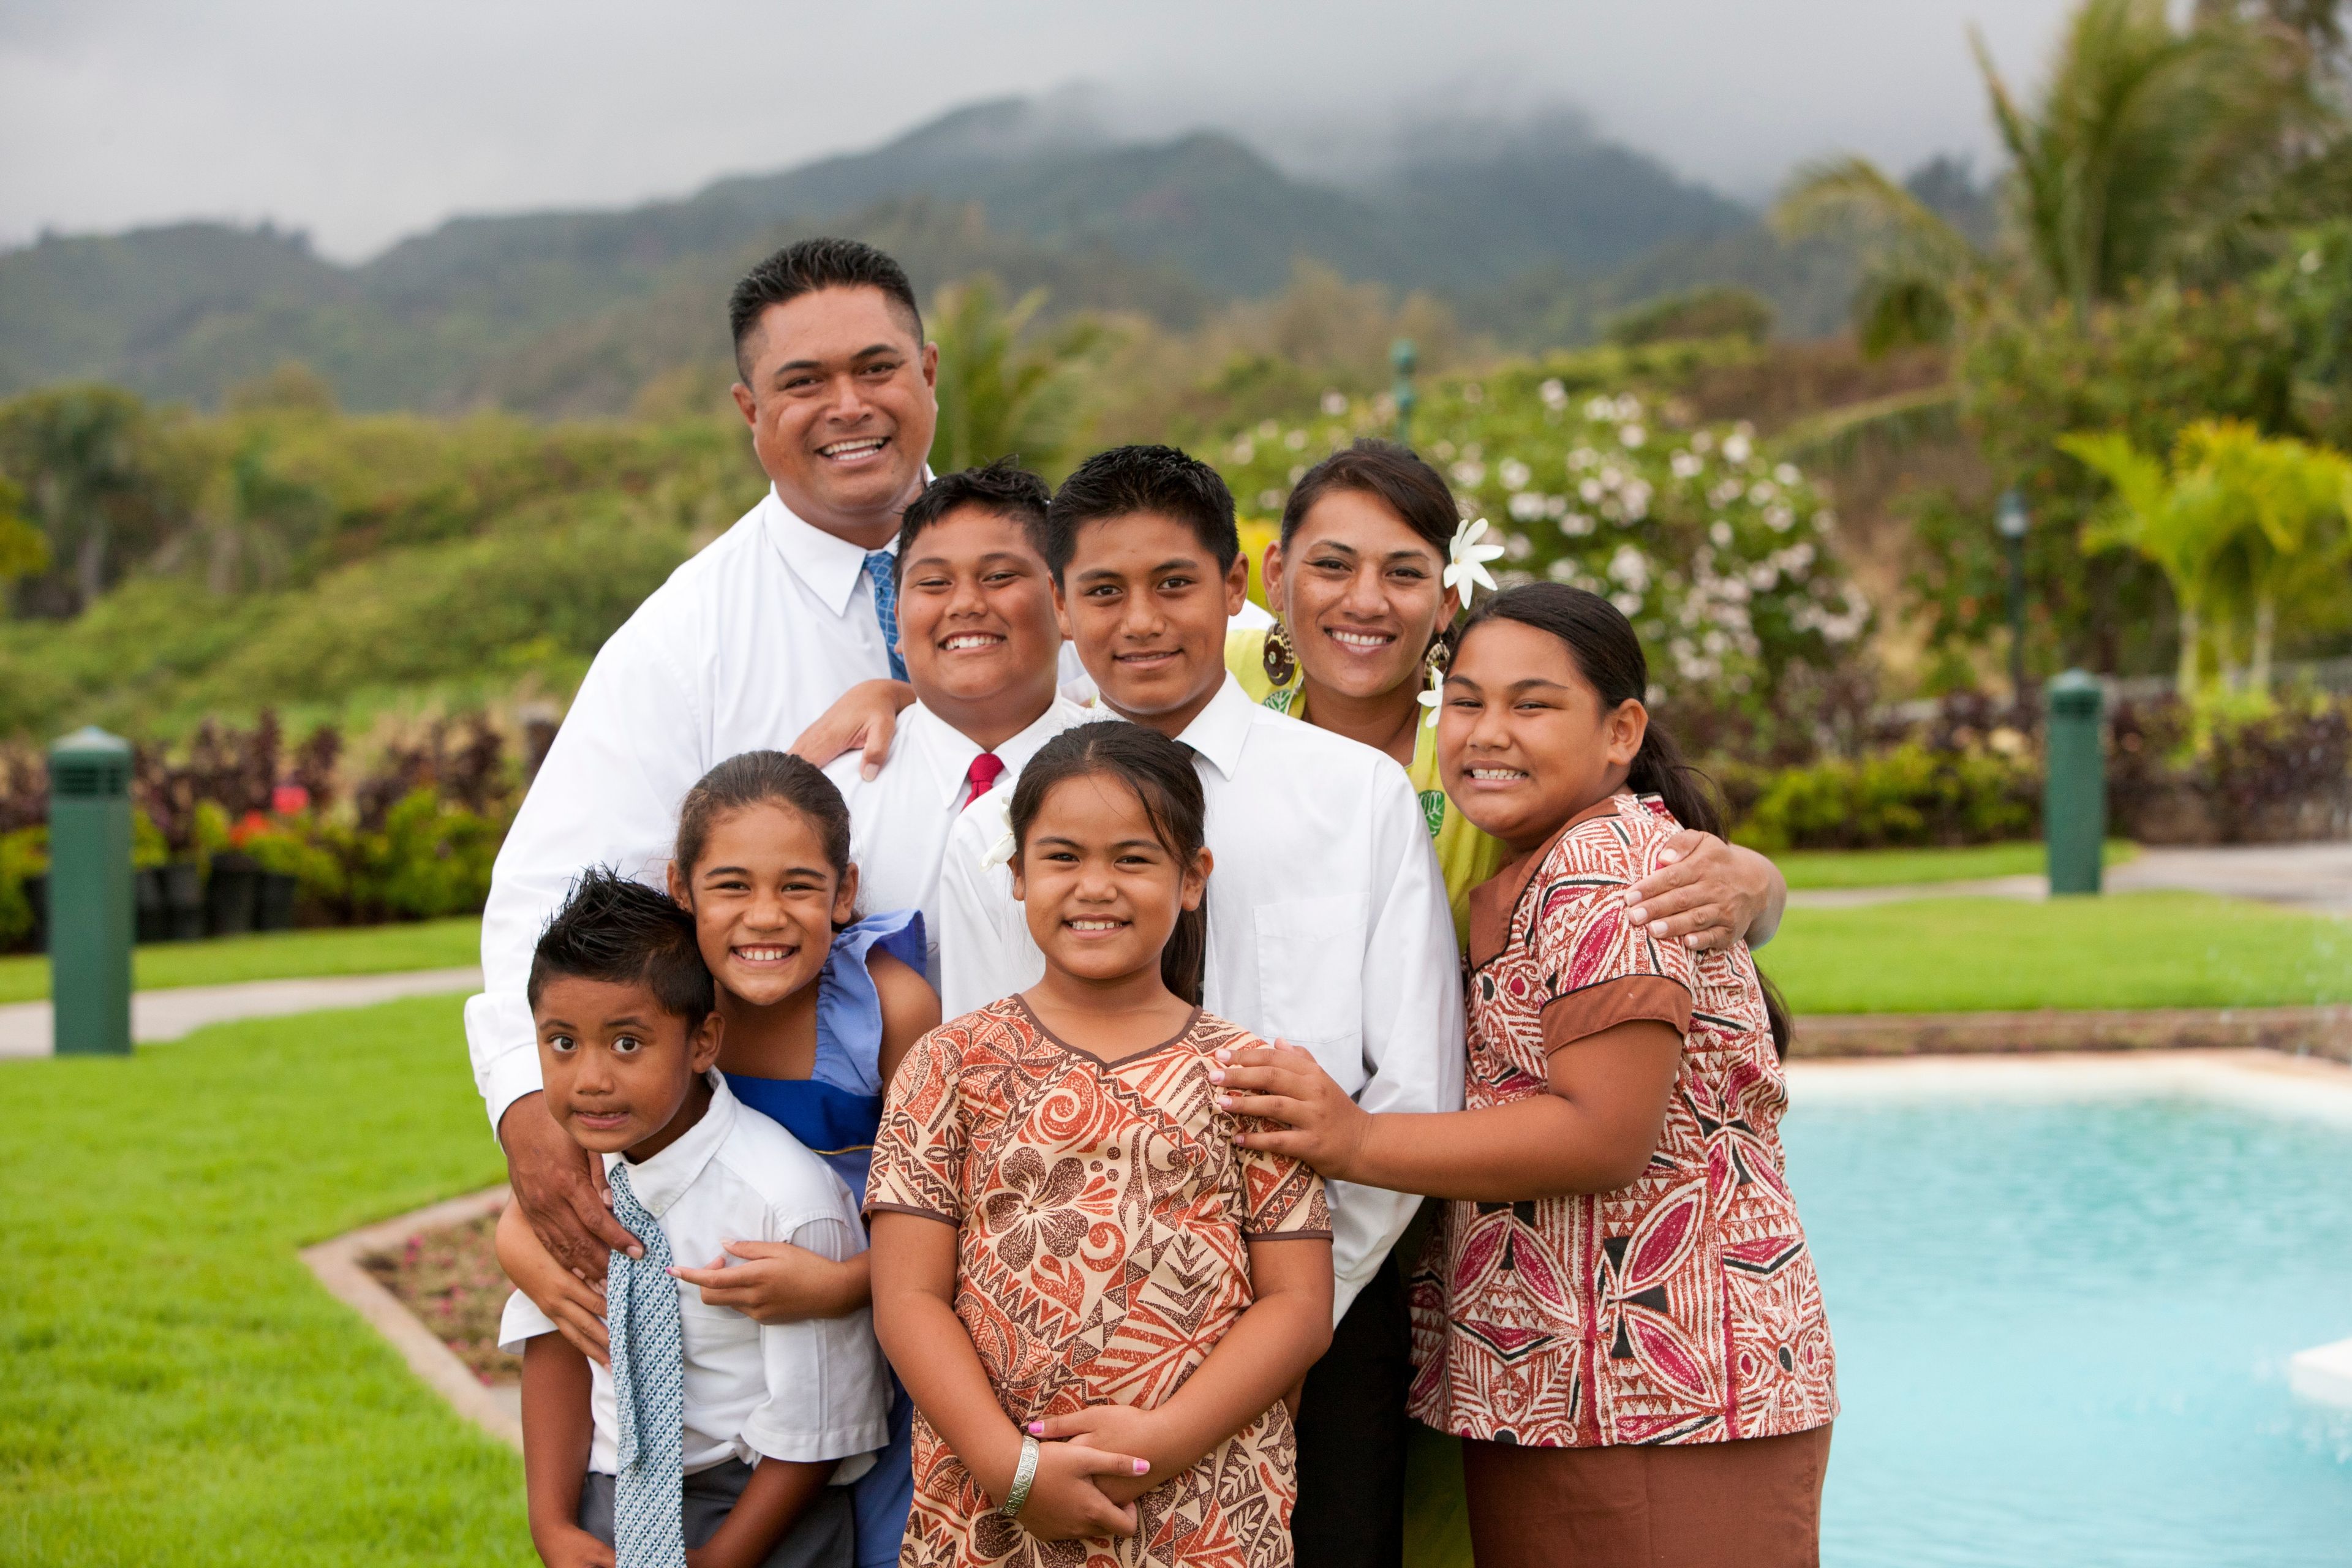 An outdoor portrait of a family of eight in Hawaii.